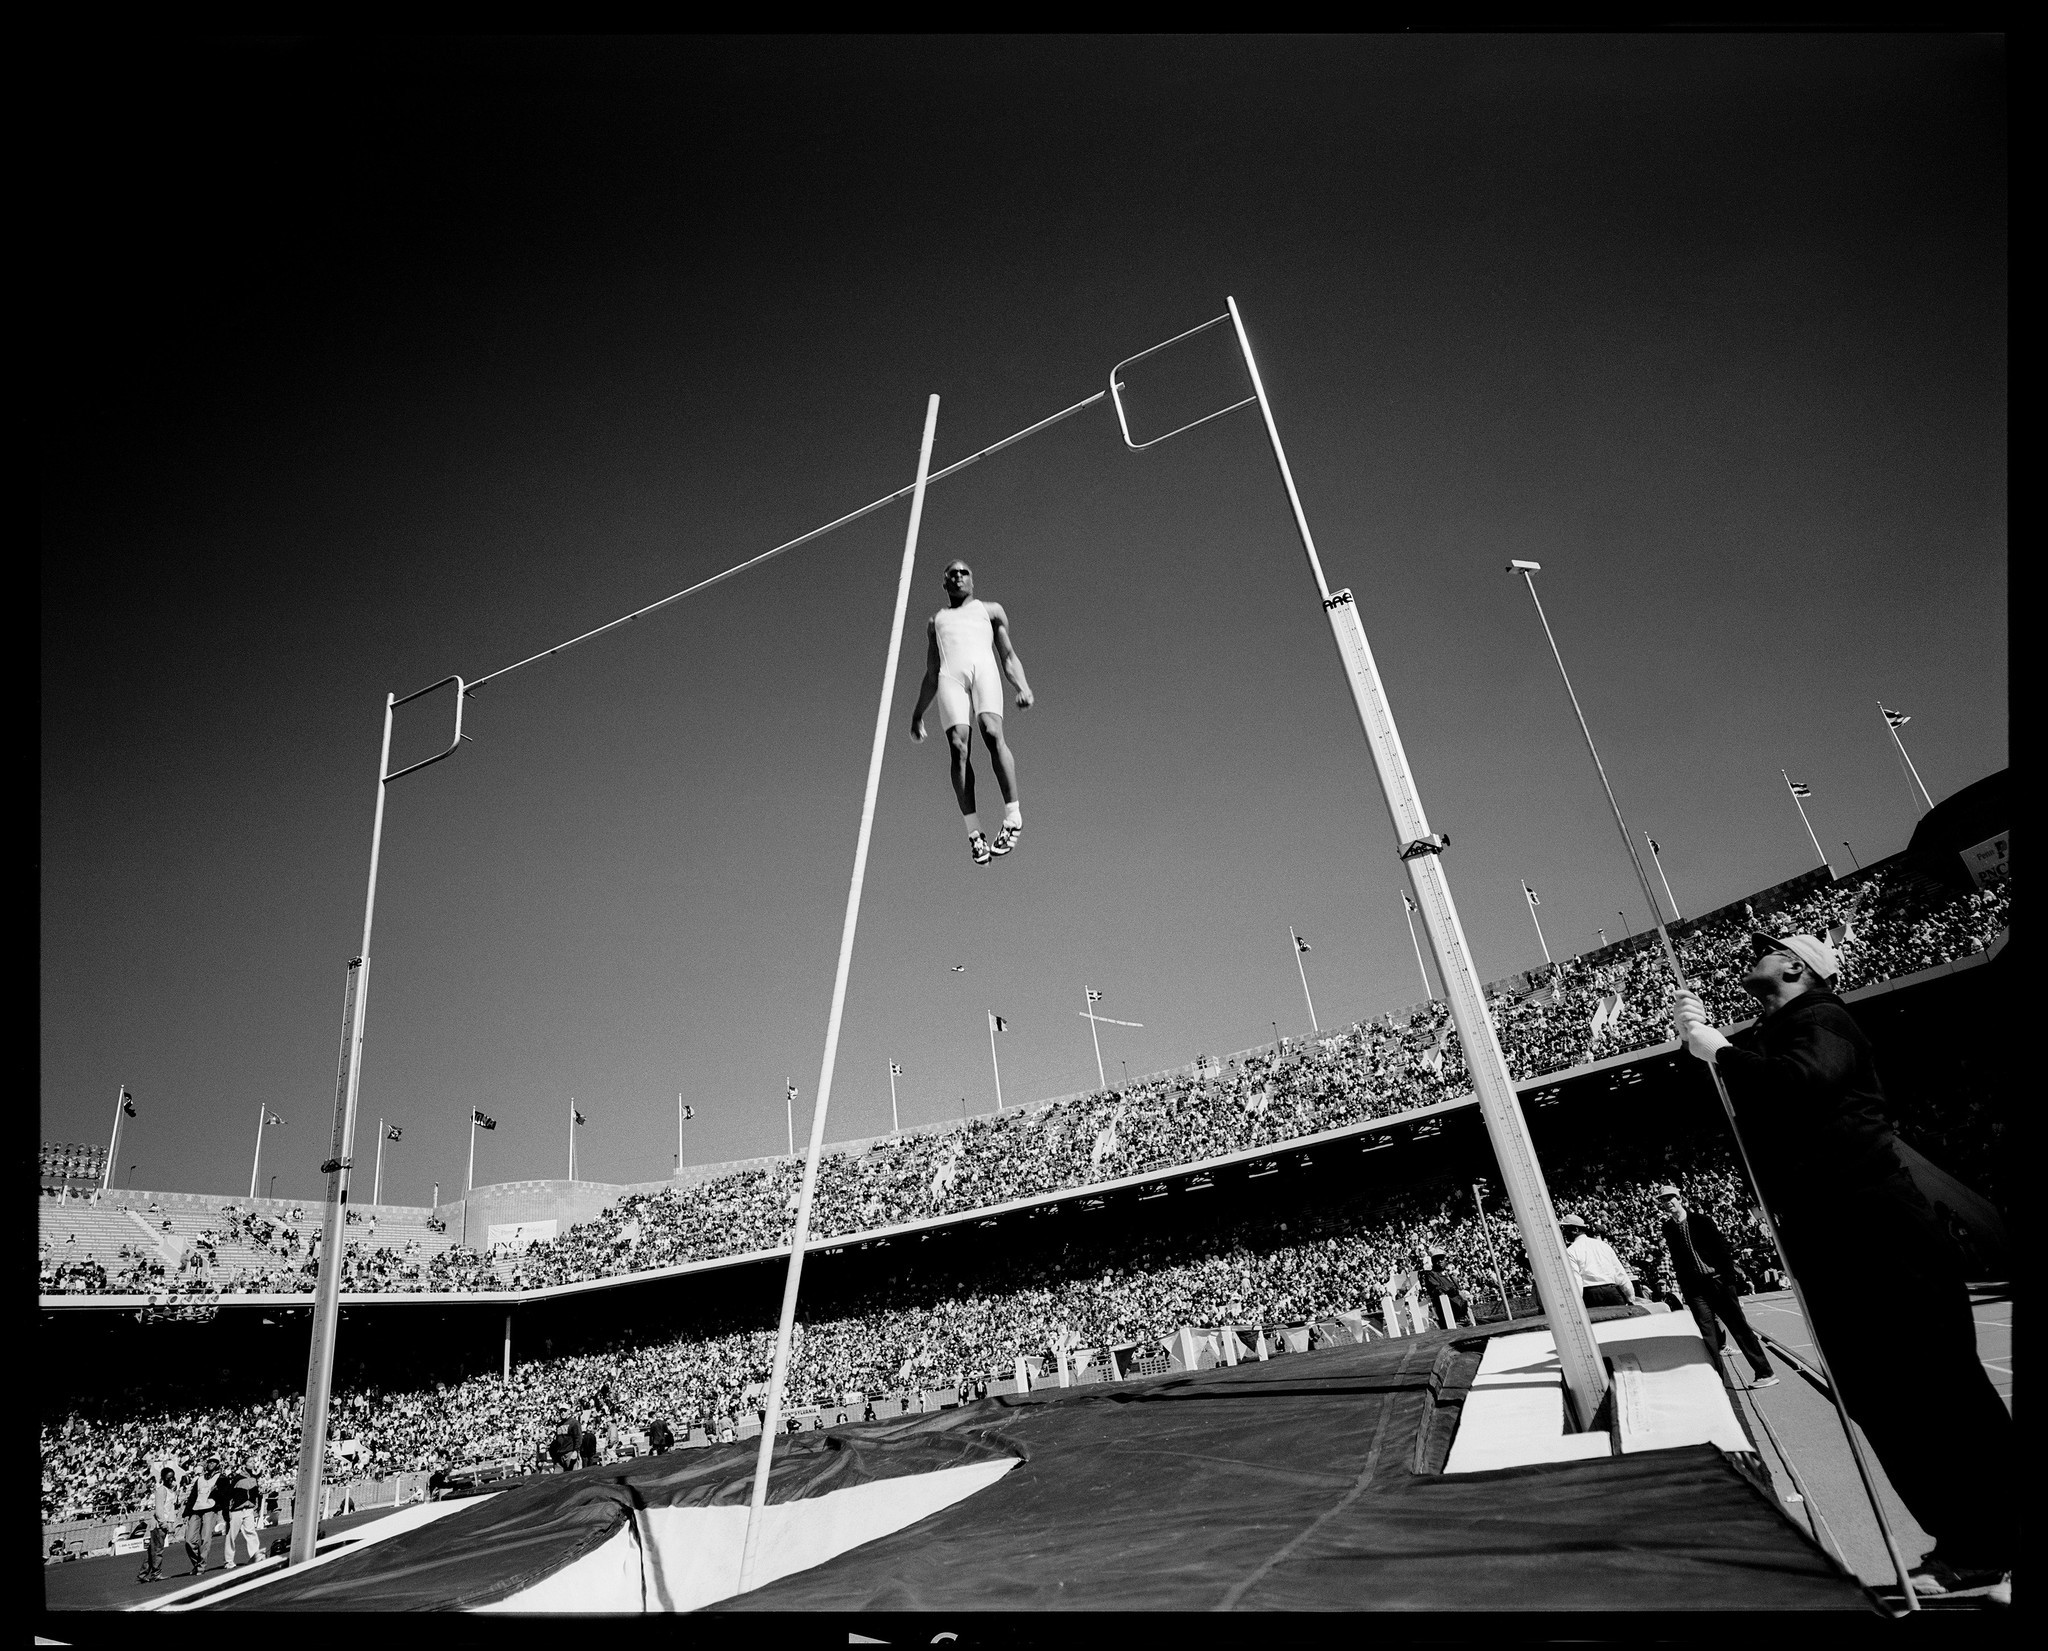 A pole vaulter at the U.S. Olympics trials in Philadelphia in 1996.